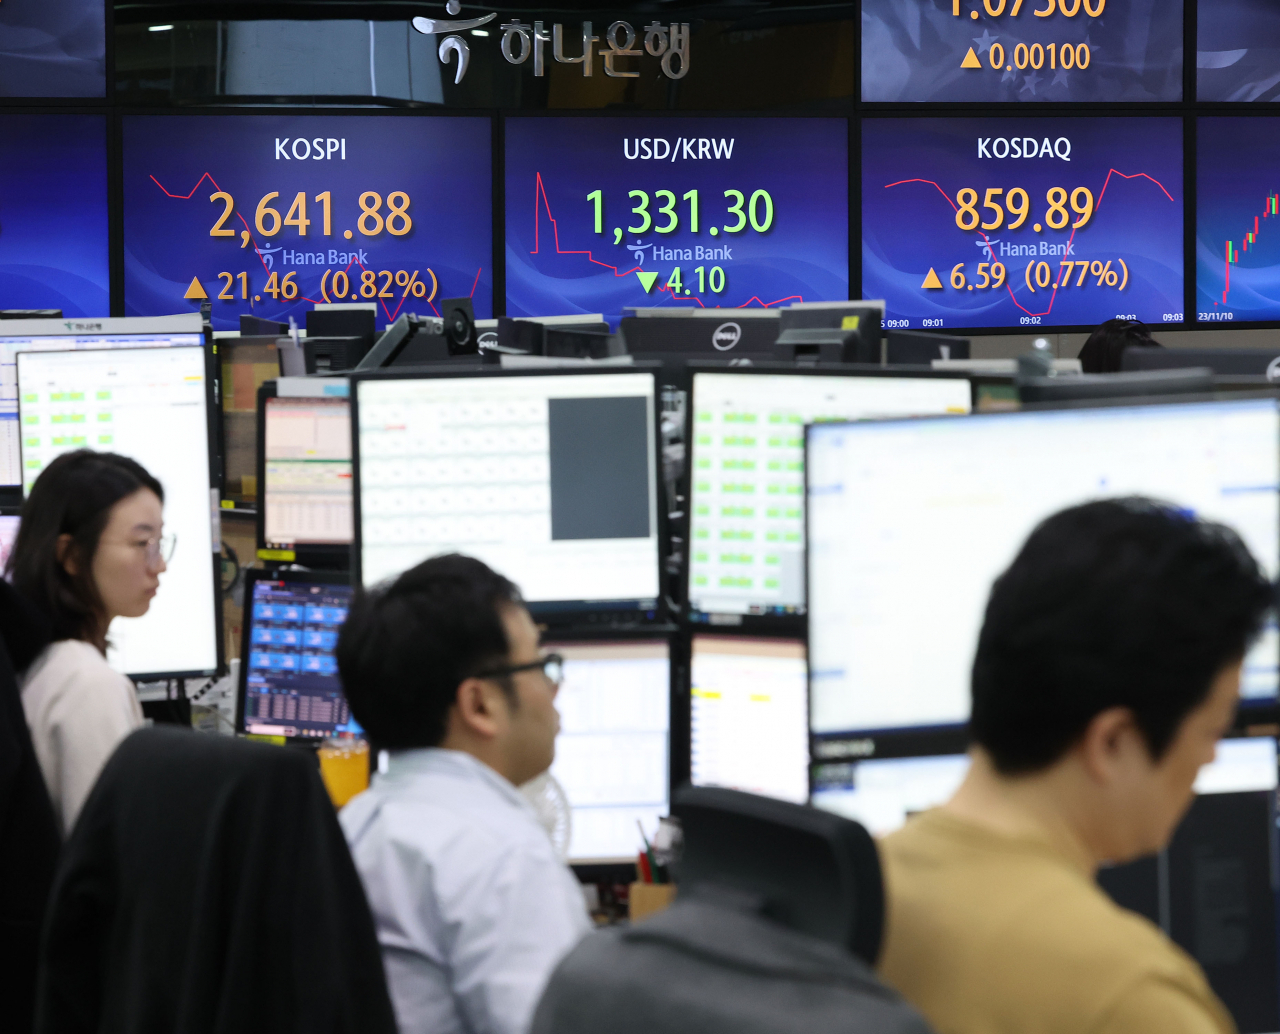 Electronic boards signboards show stocks and currency movements in South Korea at a Hana Bank dealing room in central Seoul, Thursday.